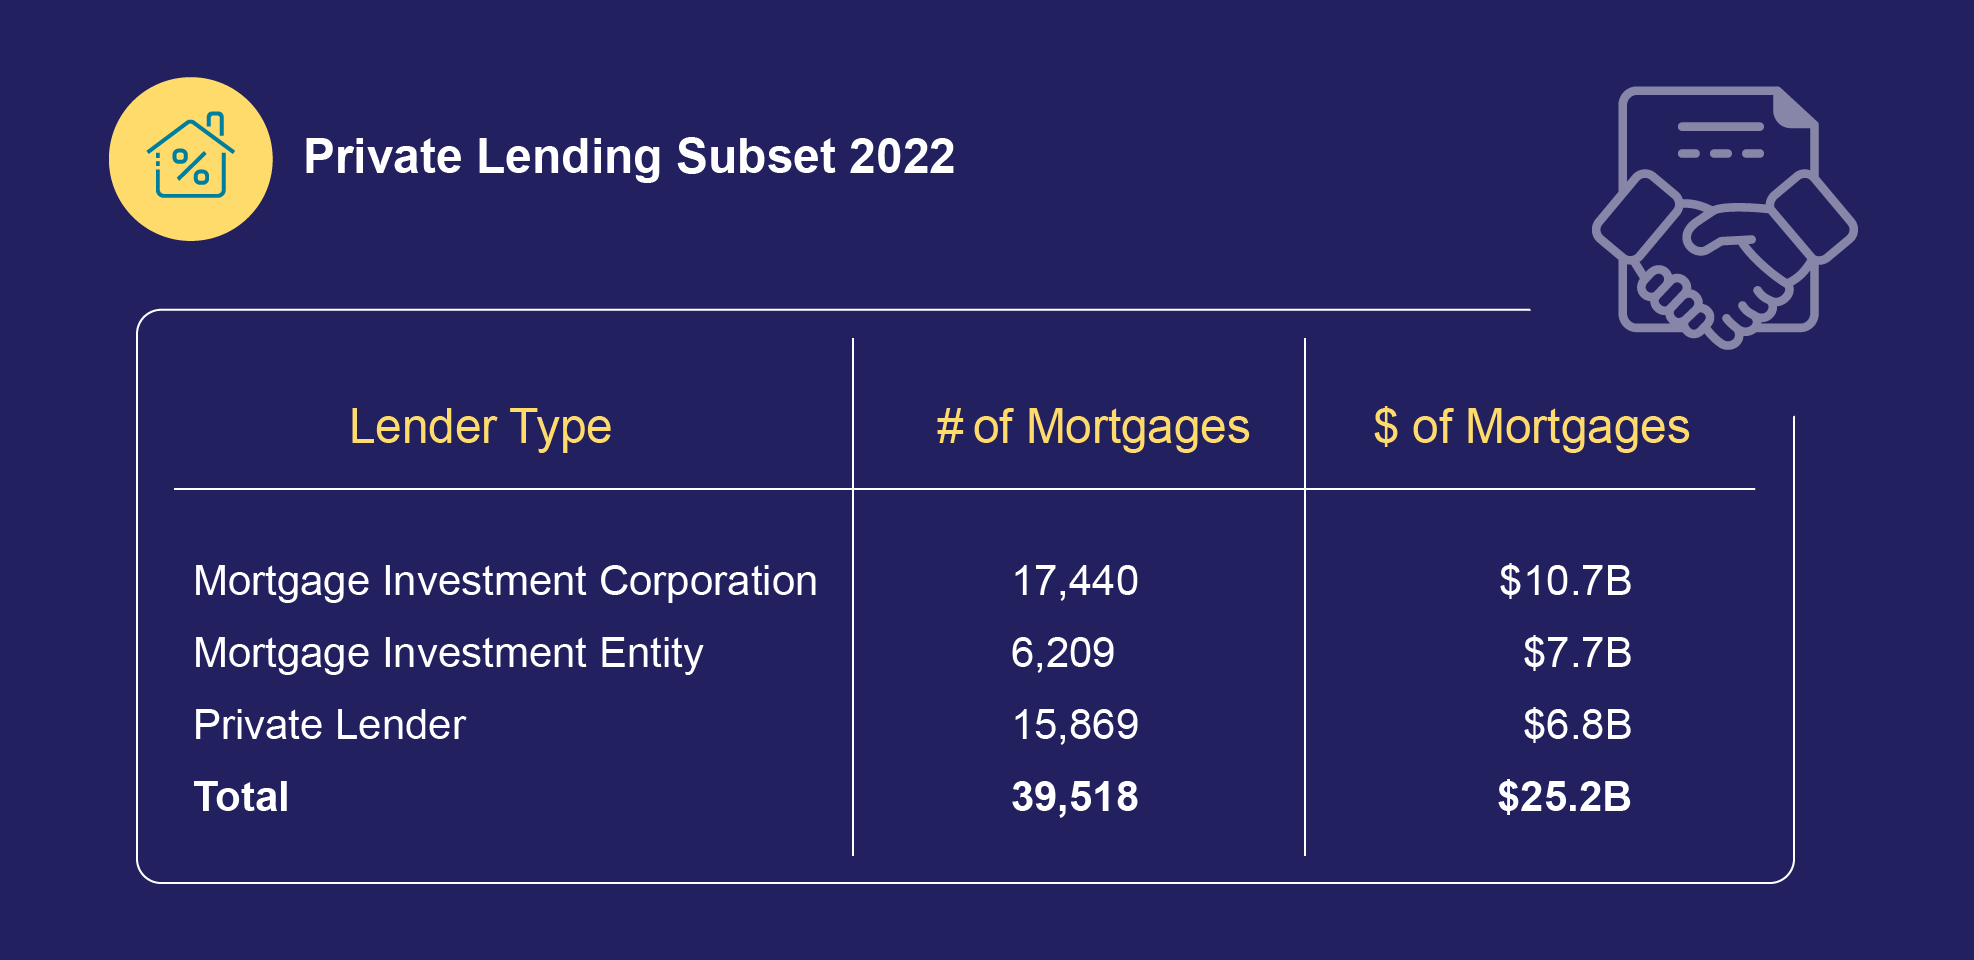 Private lending subset 2022